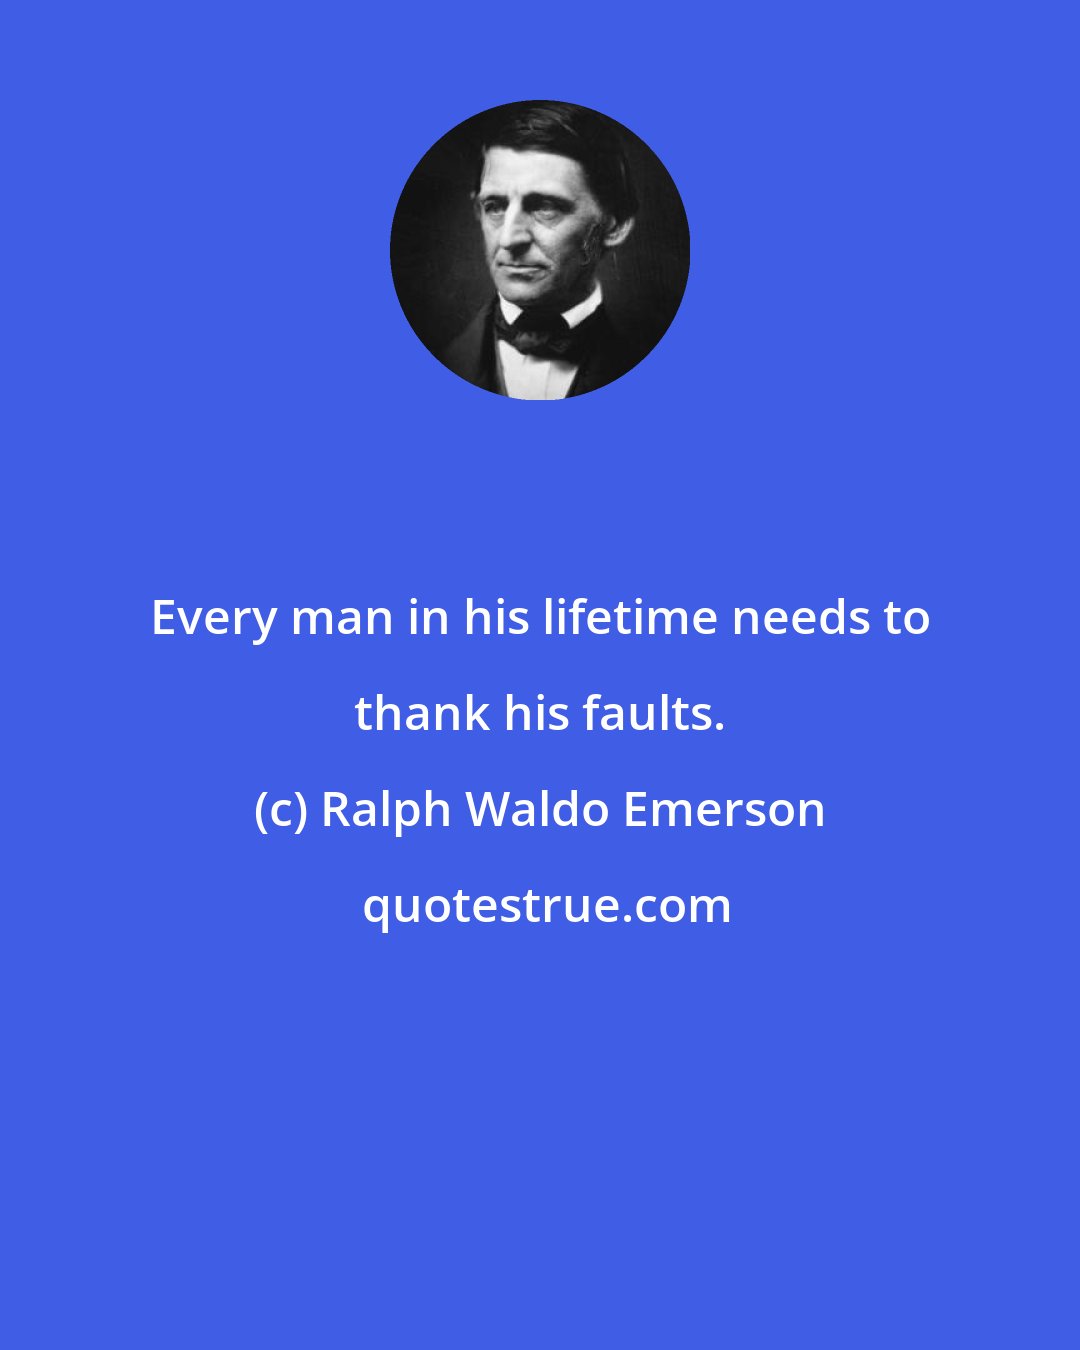 Ralph Waldo Emerson: Every man in his lifetime needs to thank his faults.